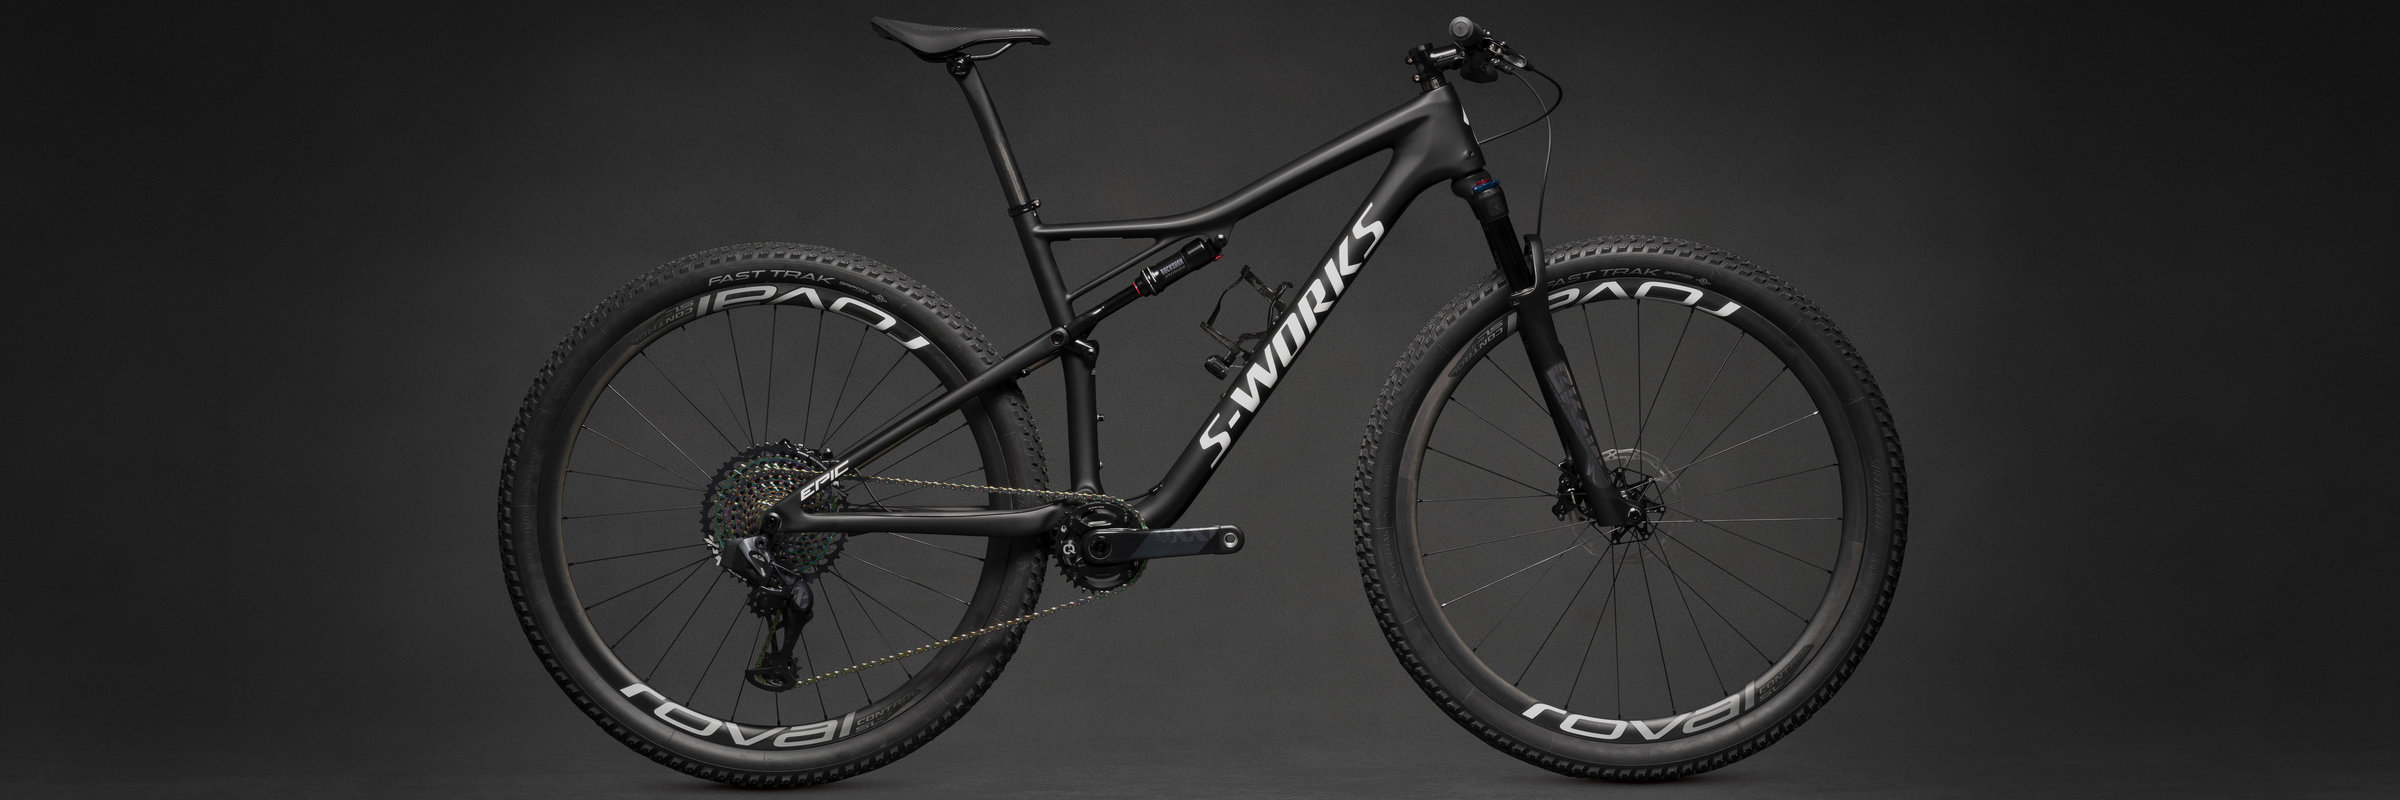 epic 2020 specialized